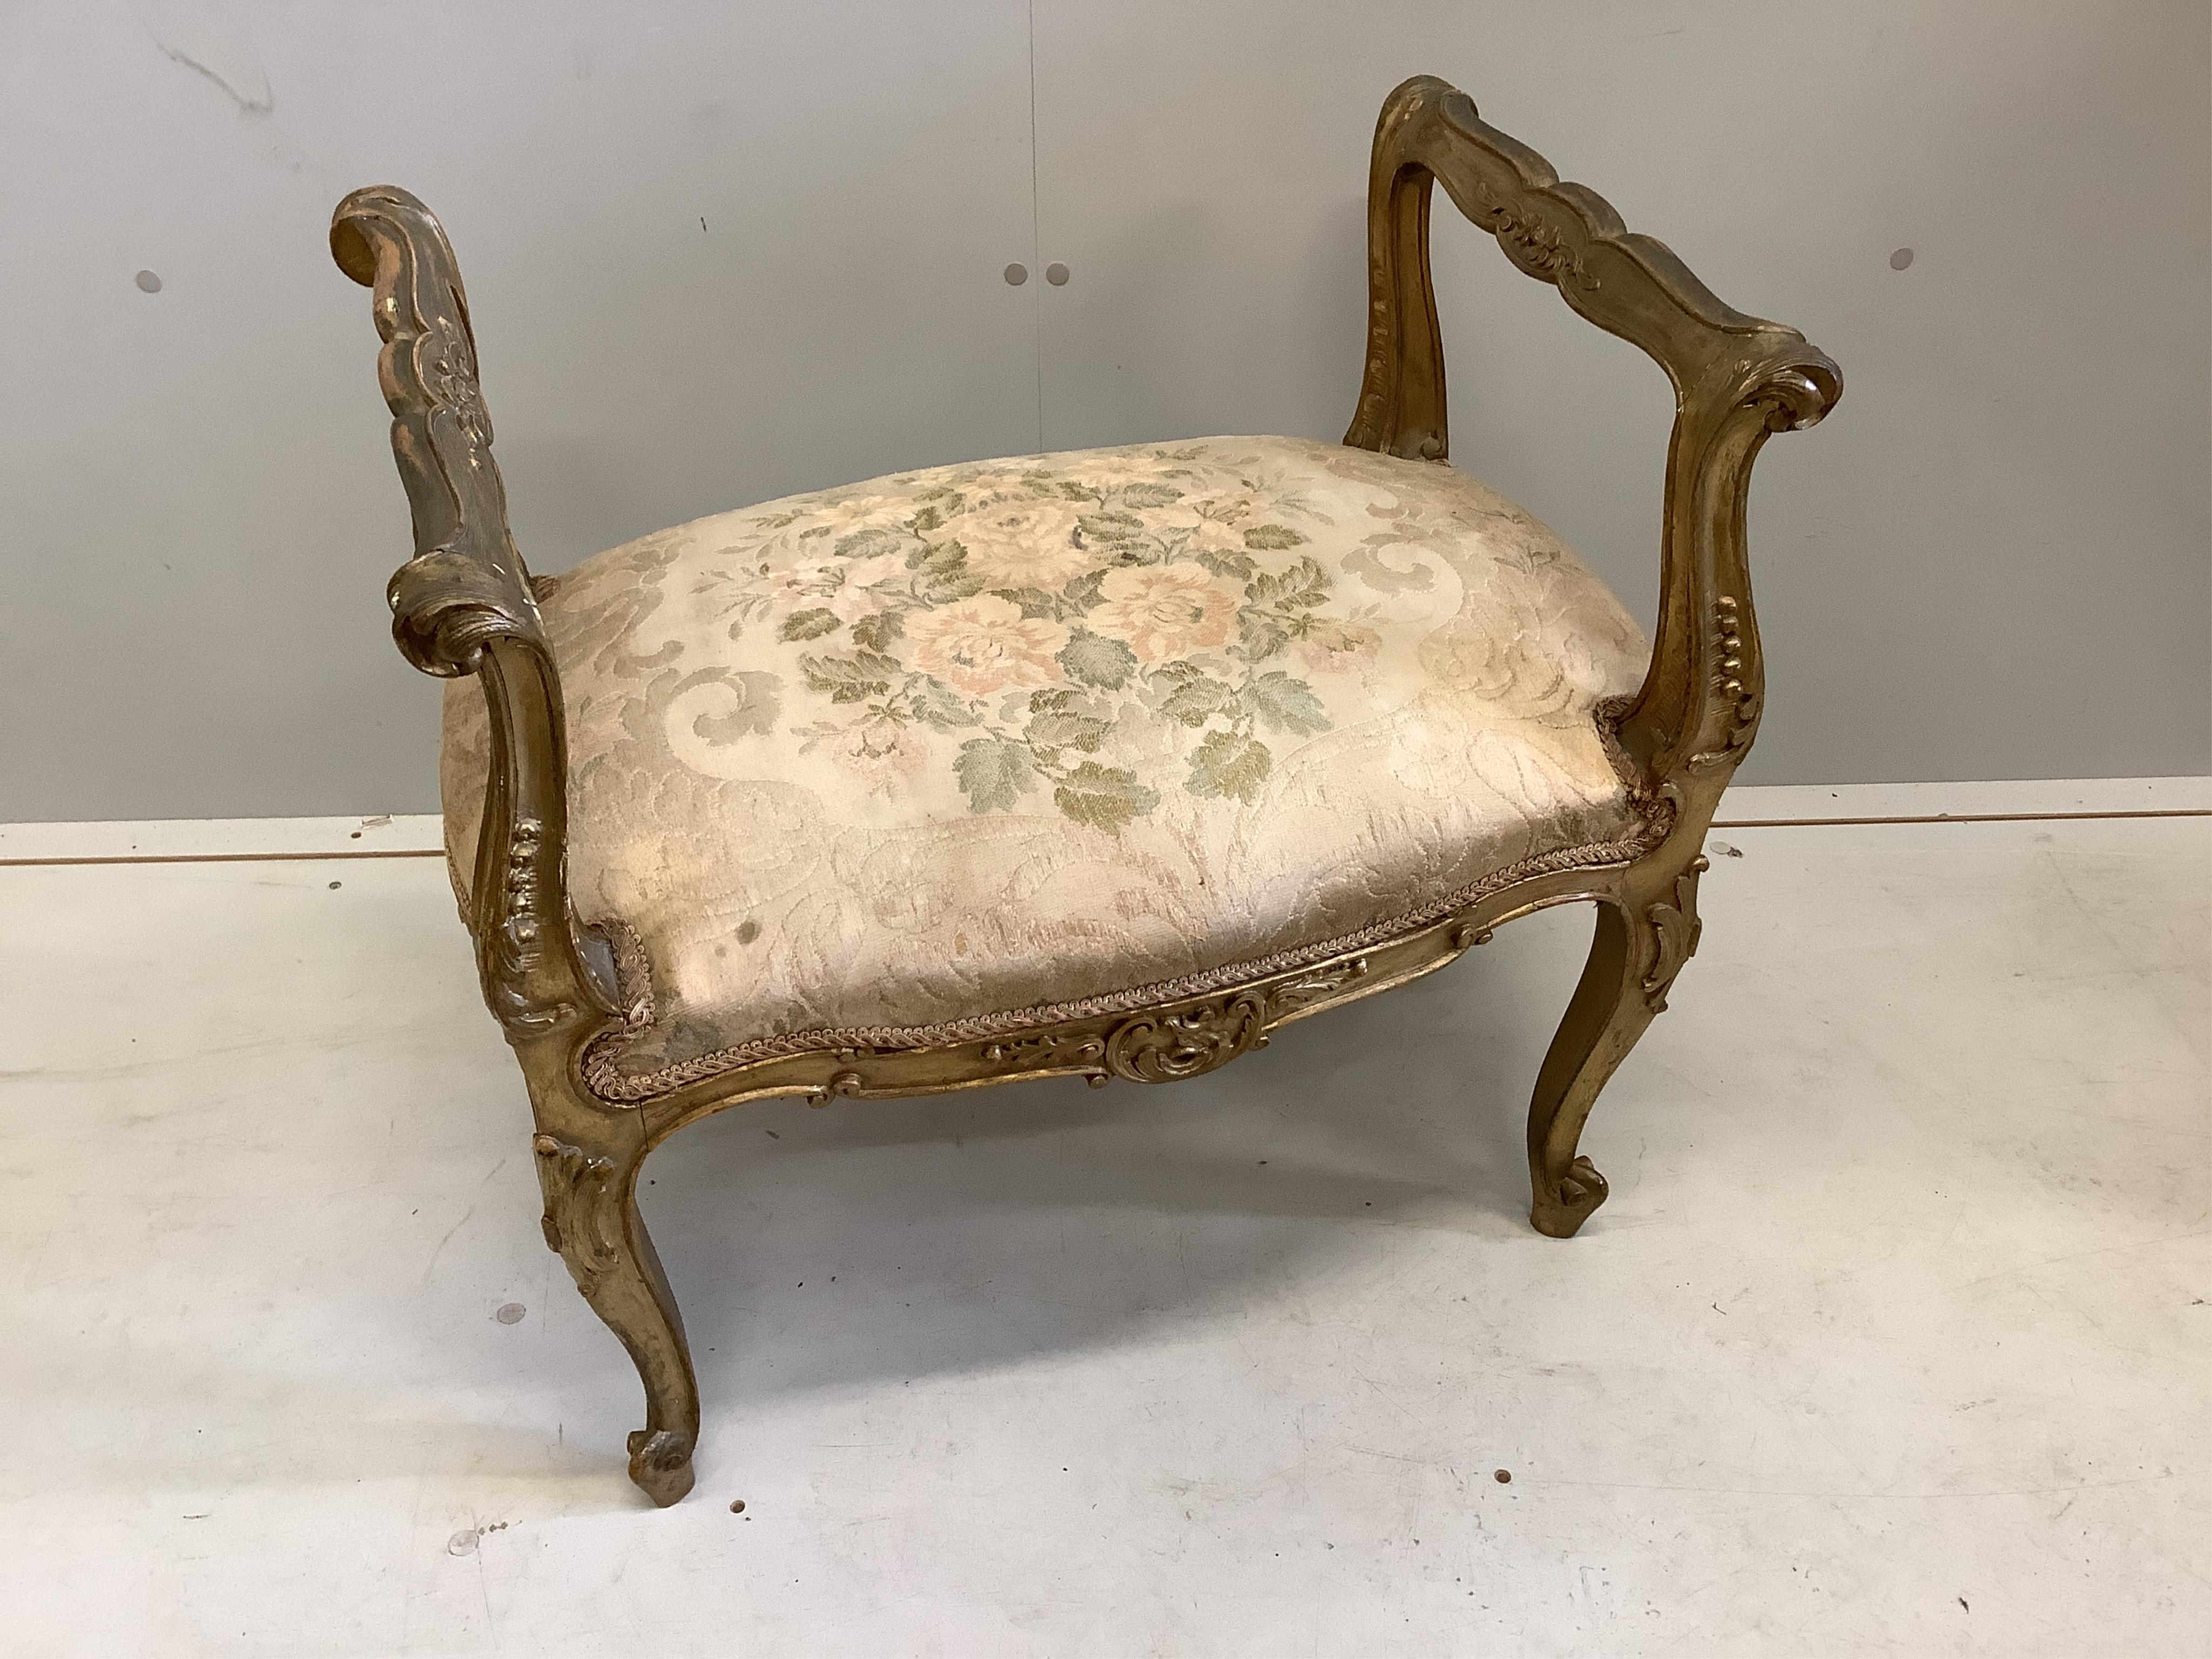 A 19th century French carved giltwood and composition dressing stool, width 62cm, depth 41cm, height 62cm. Condition - fair